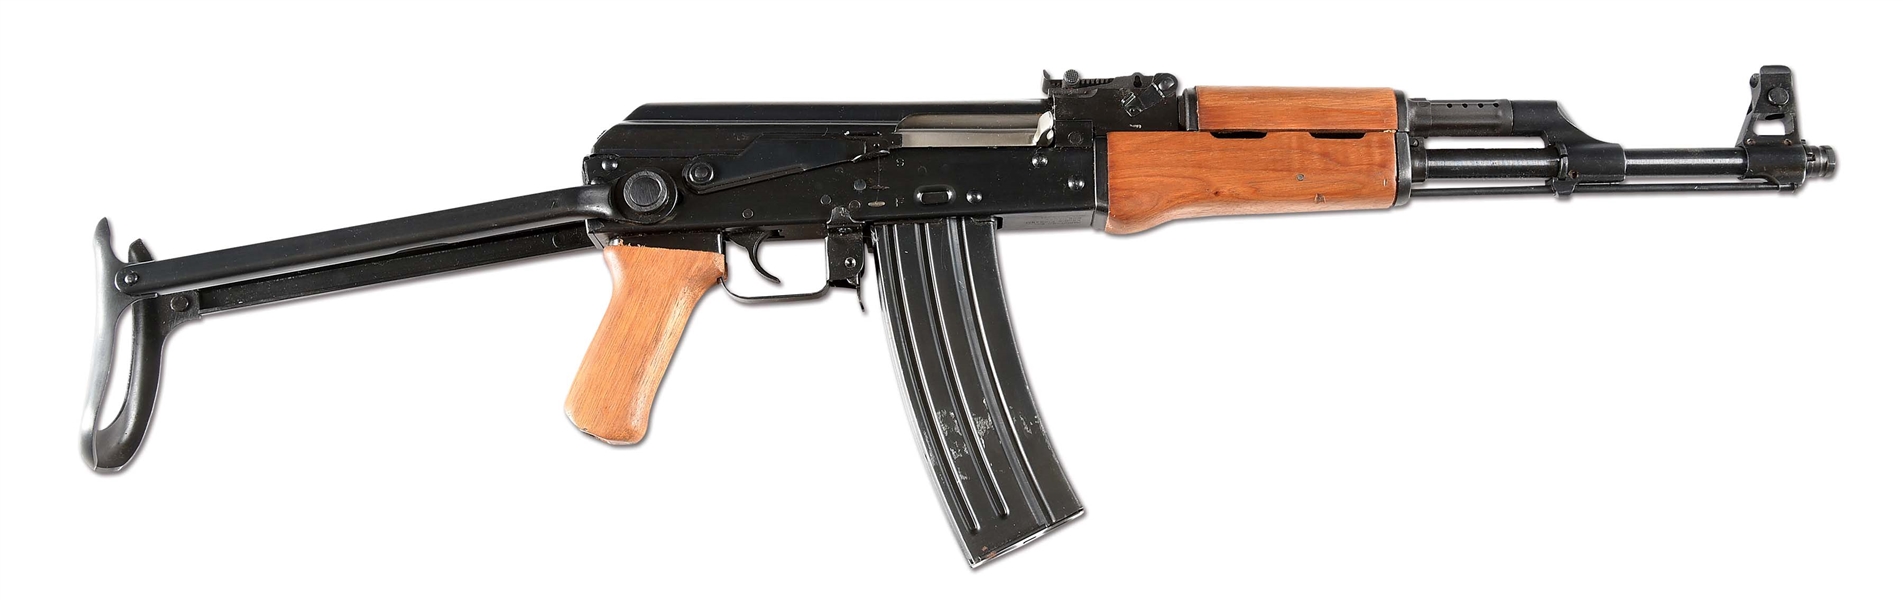 (N) ATTRACTIVE CHINESE MANUFACTURED UNDER-FOLDING STOCK AKS-223 MACHINE GUN (FULLY TRANSFERABLE).